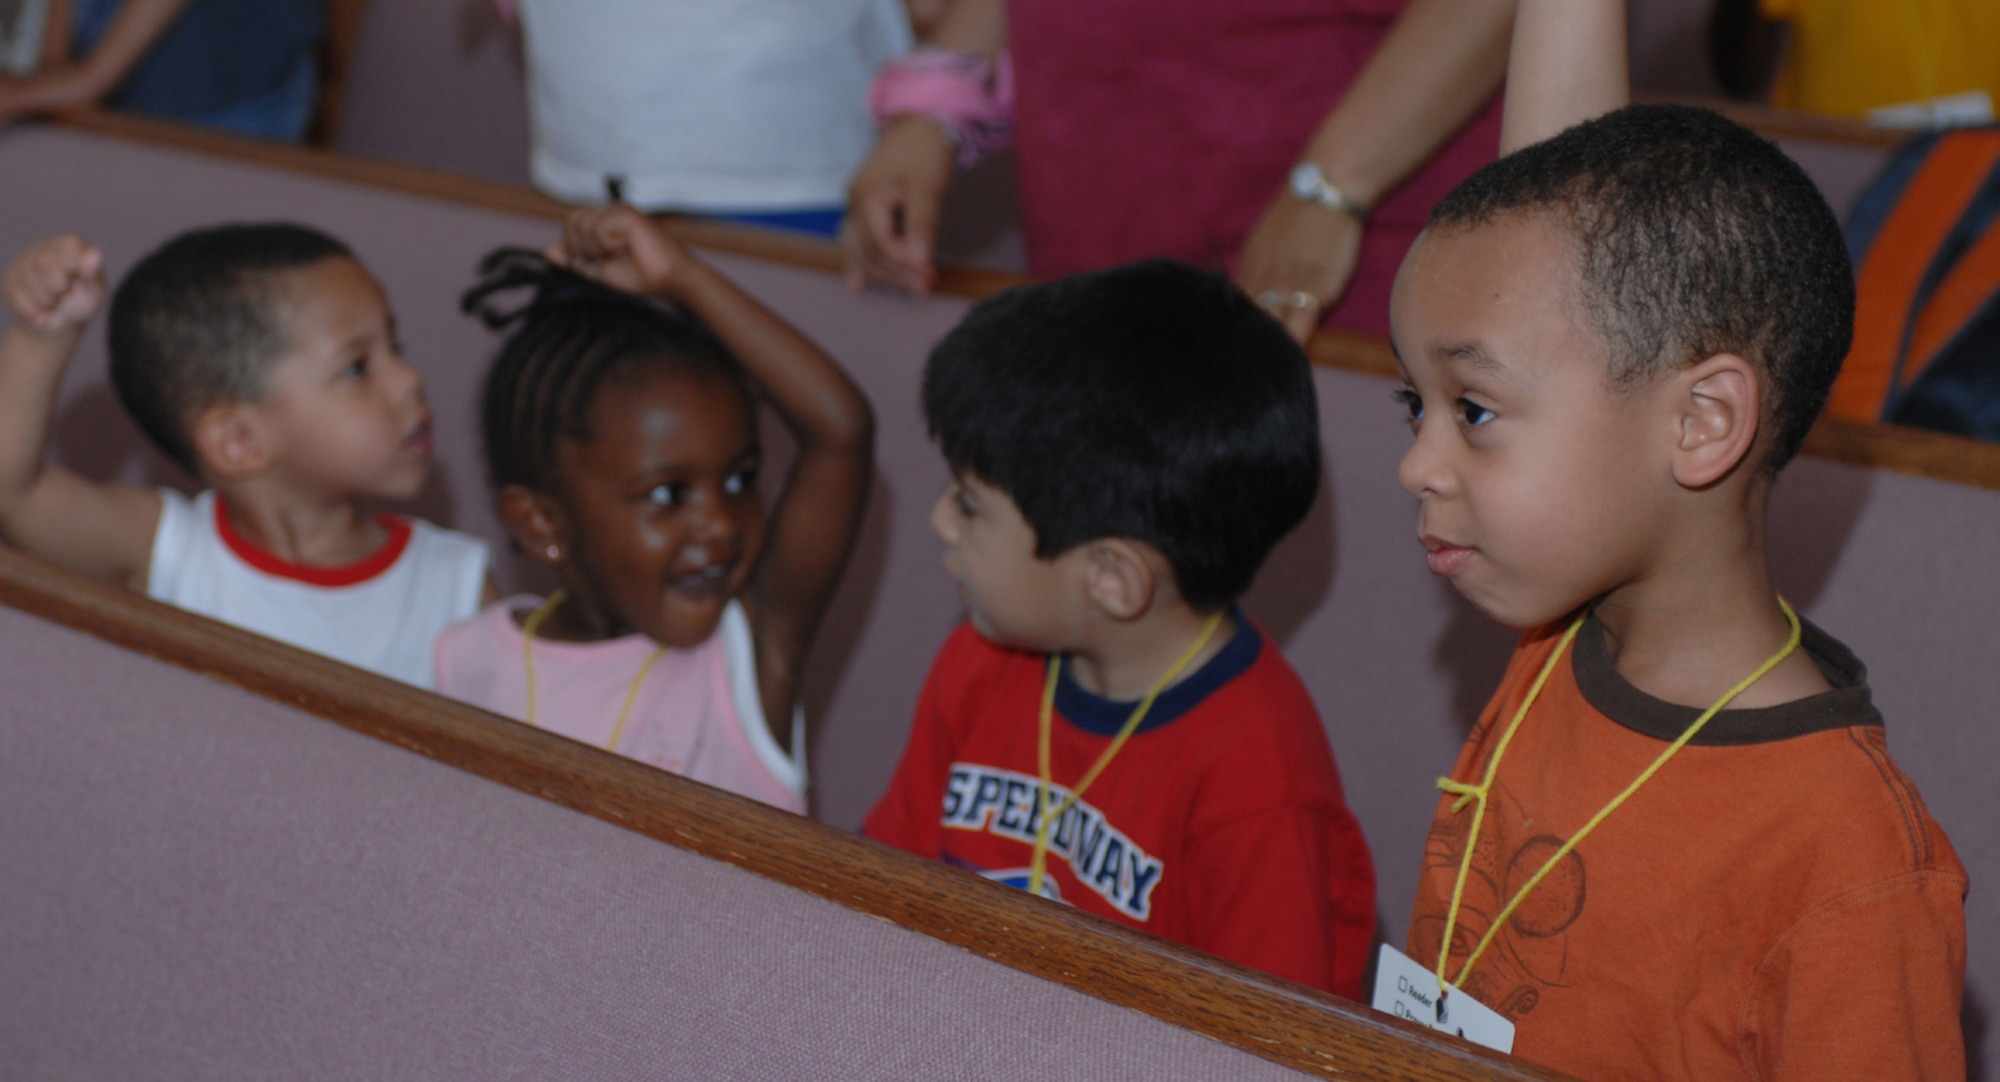 DYESS AIR FORCE BASE, Texas - Stephen Scott and the rest of his class, the "Prarie Dogs," sing along to a song they have learned while at Vacation Bible School at the base chapel June 6. During the week-long event, the children learn a different religious lesson every day. To remember the lesson, they do fun activities and sing alongs. (U.S. Air Force photo by Airman 1st Class Jennifer Romig)